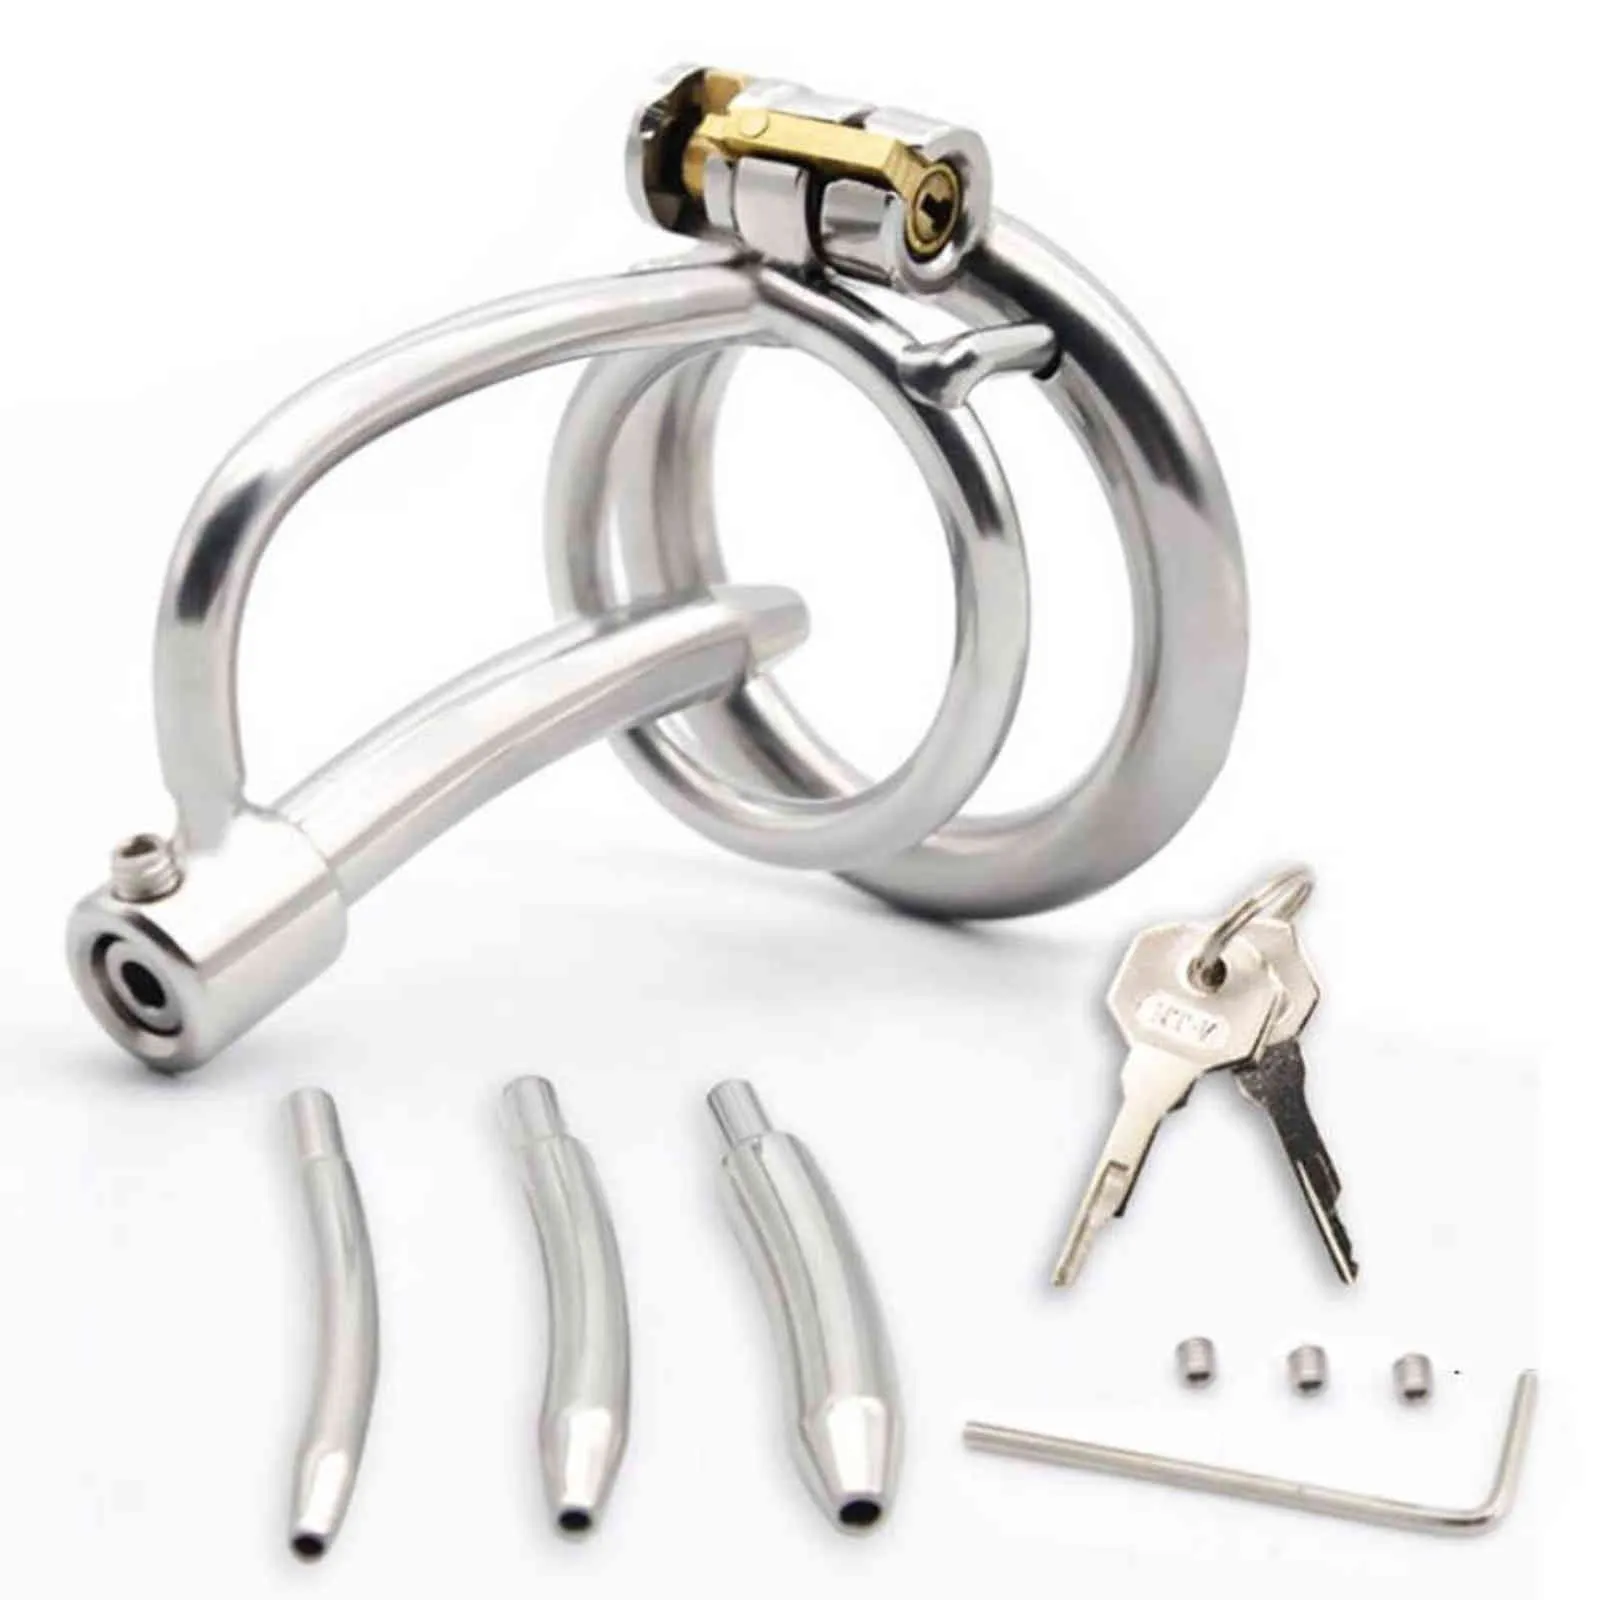 NXY Sex Chastity Devices Rostfritt stål Mäns Ring Penis Kateter Chastity Cage Belt Sex Toy 1126